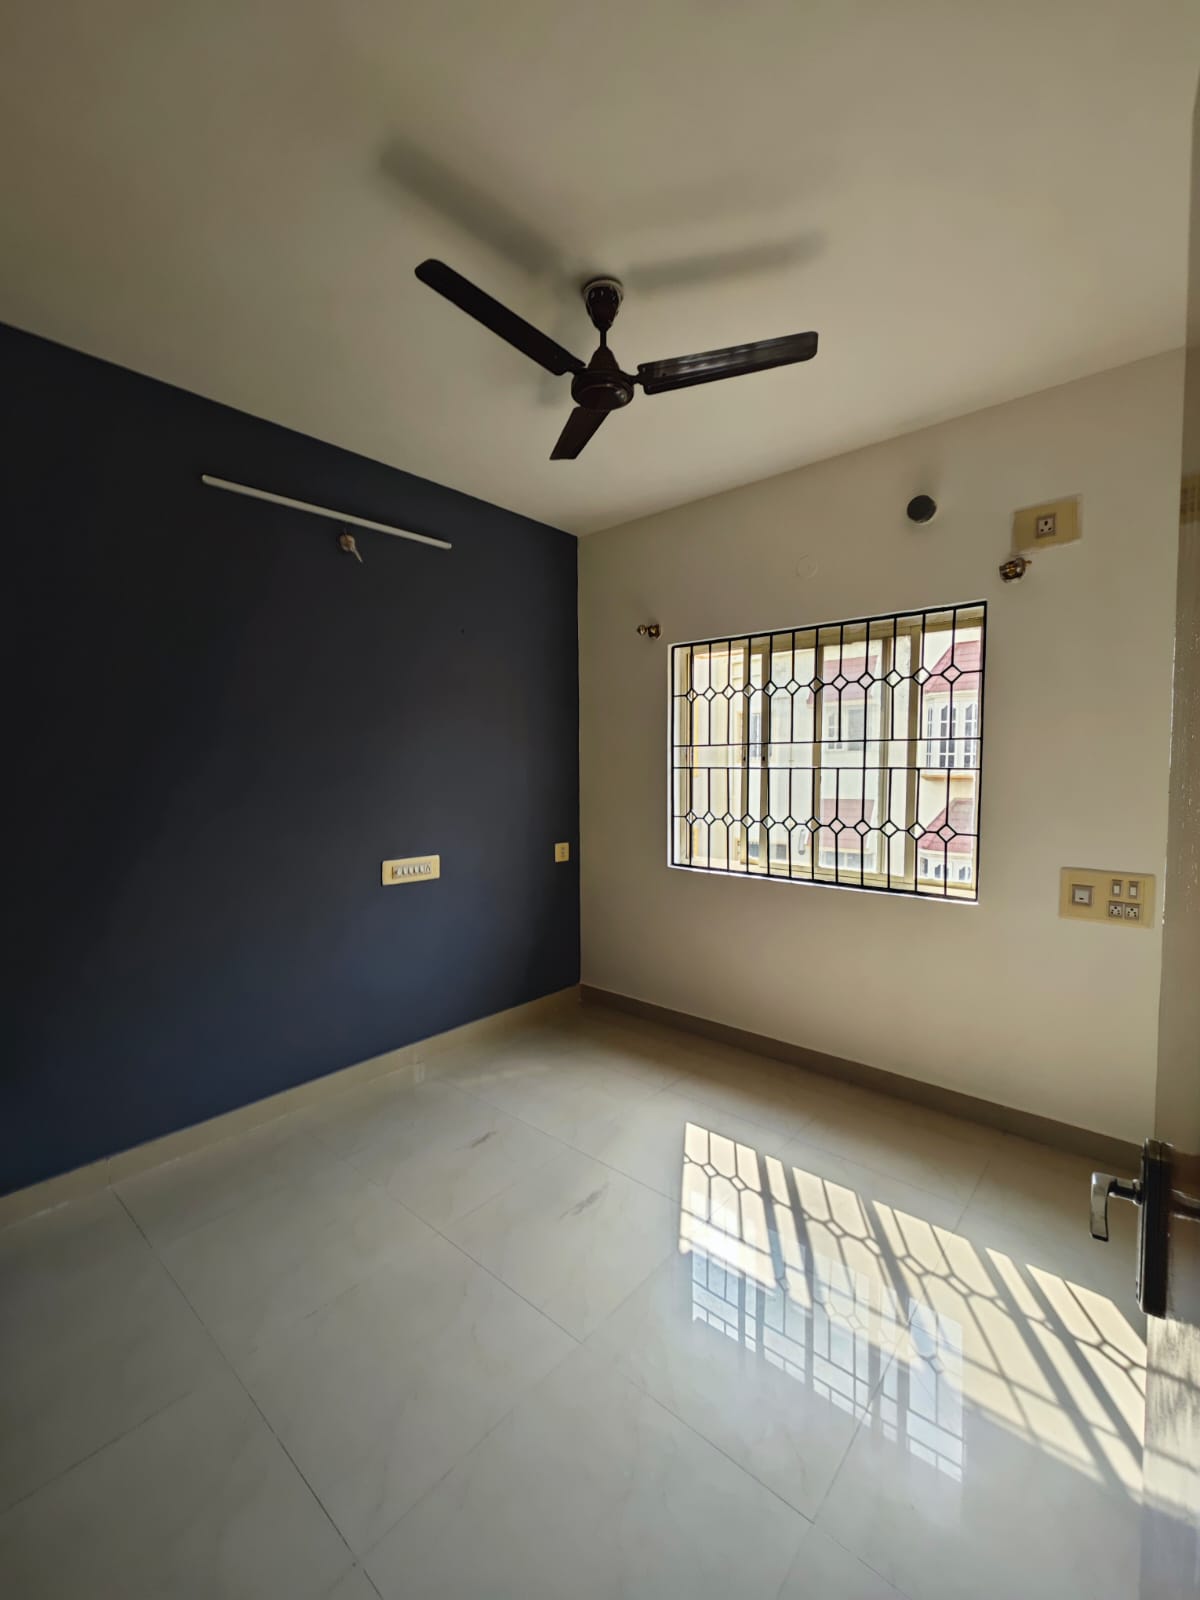 3 BHK Residential Apartment for Lease Only at JAML2 - 4545 in Yelahanka